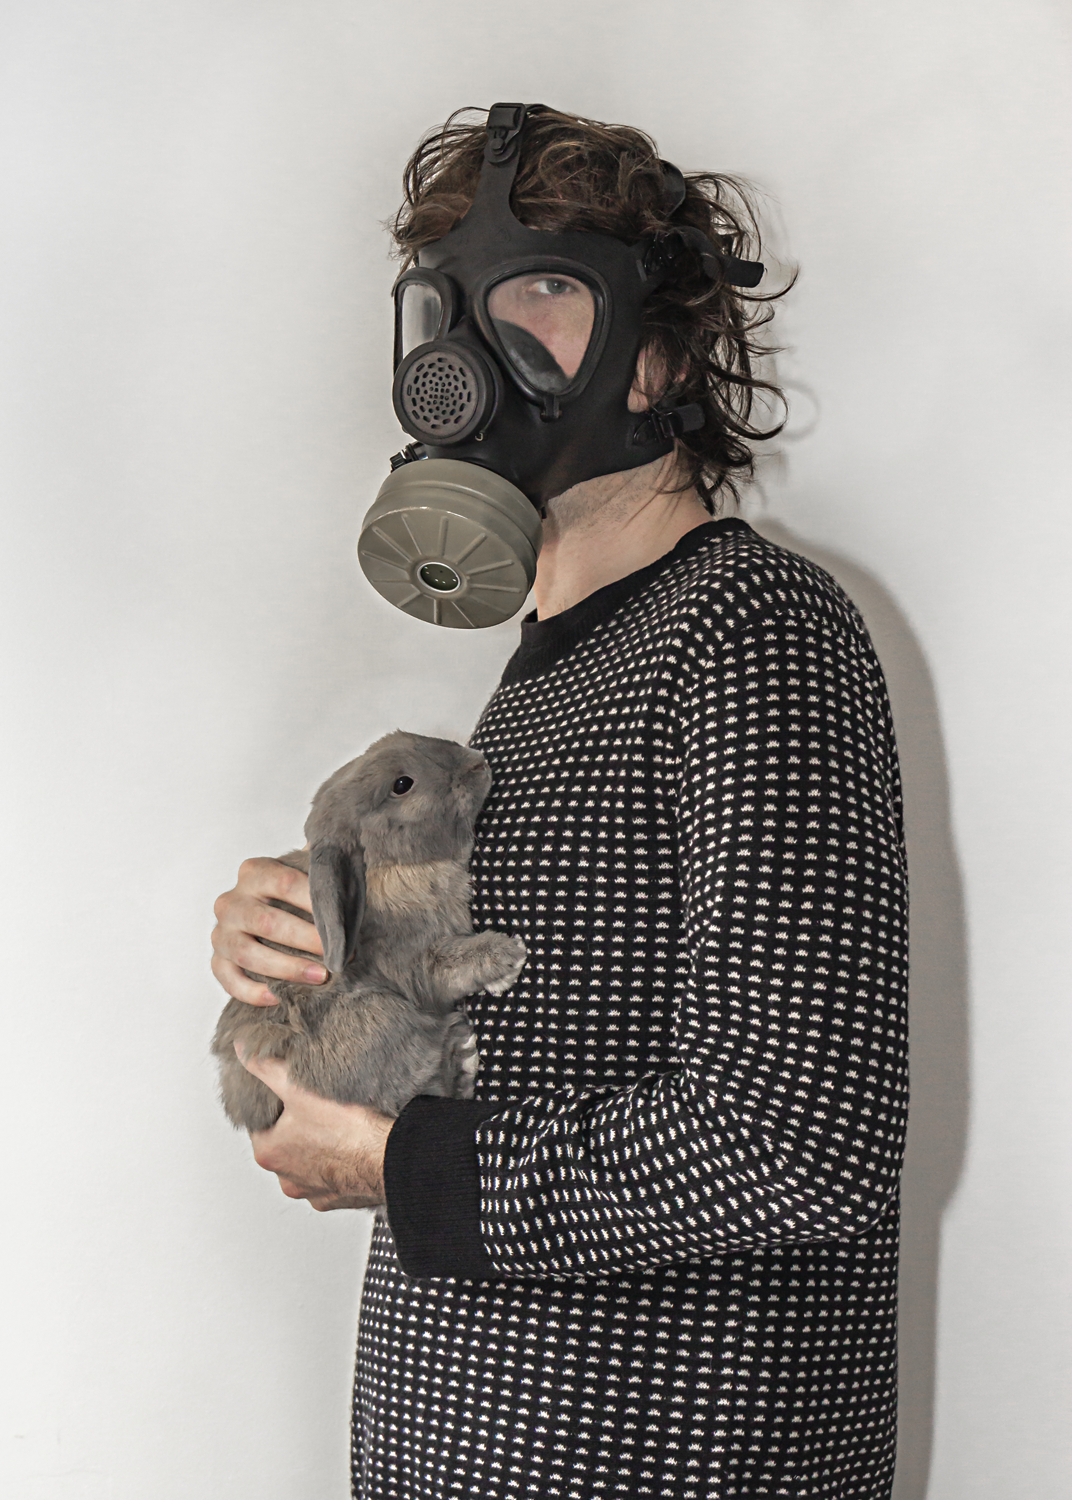 Colour photograph of man in black jumper holding a grey rabbit, wearing a black gas mask.